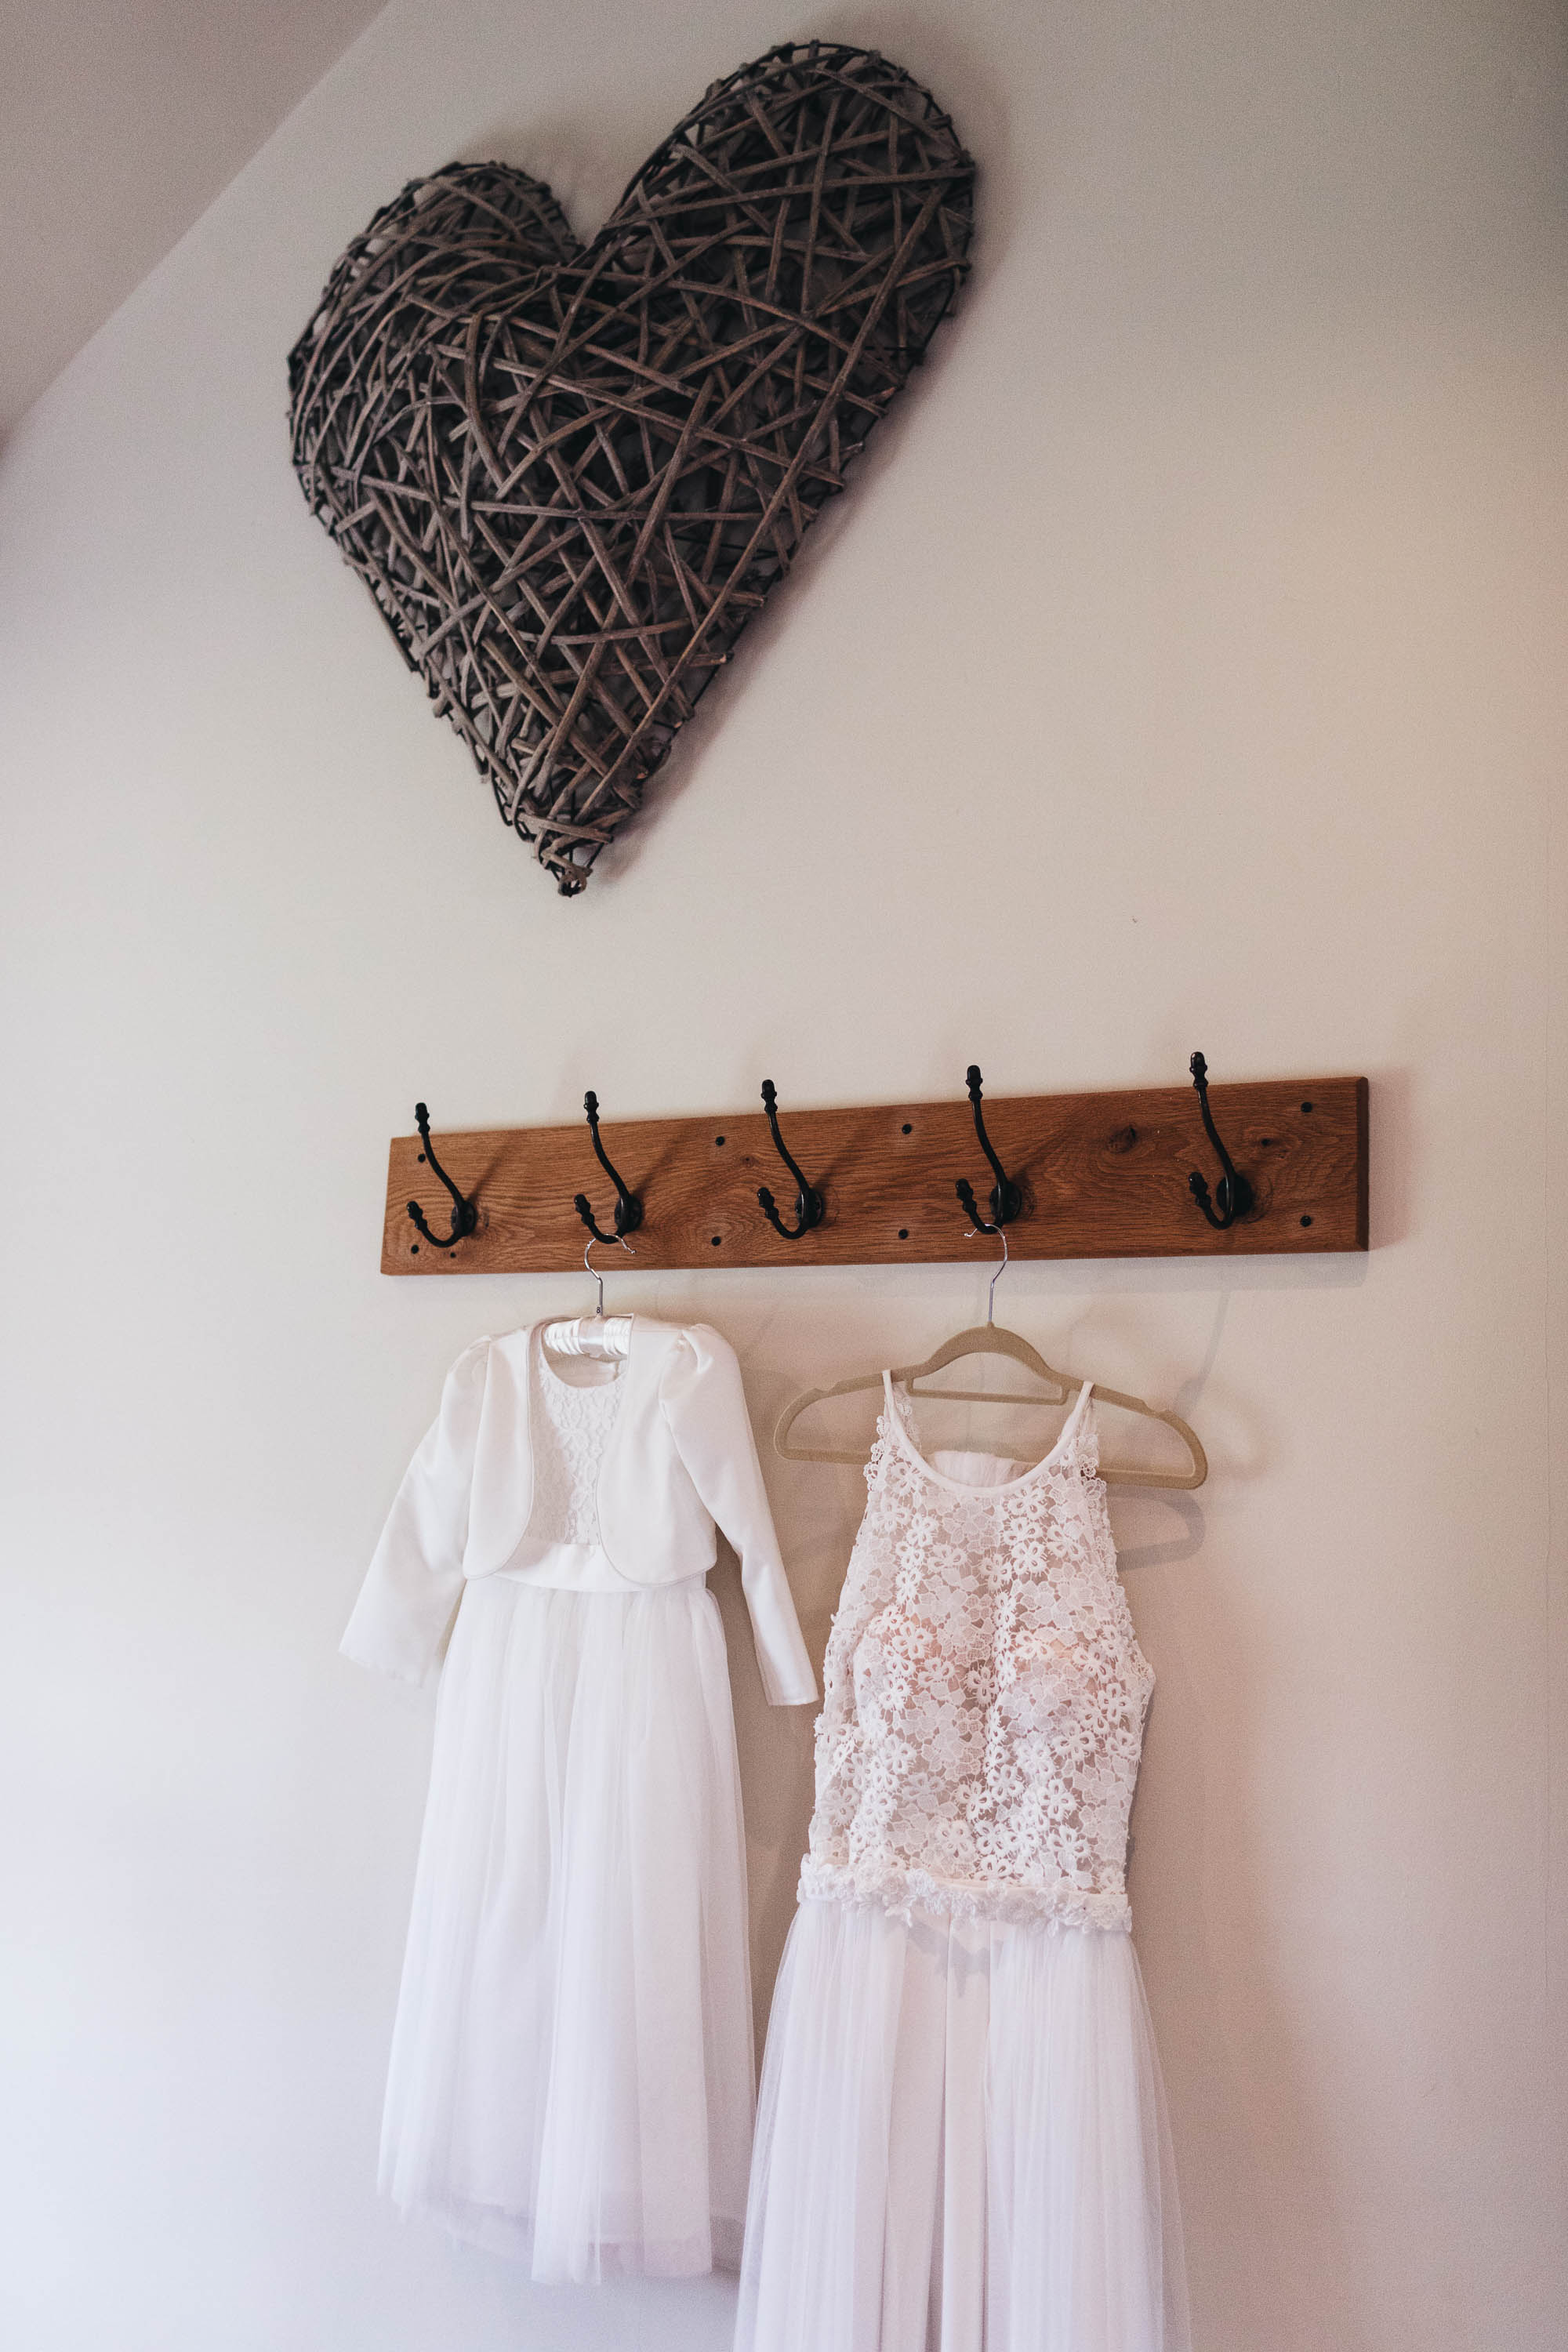 Wedding dress and flower girl dress hung up next to each other with a wooden thatched heart sculpture on the wall above